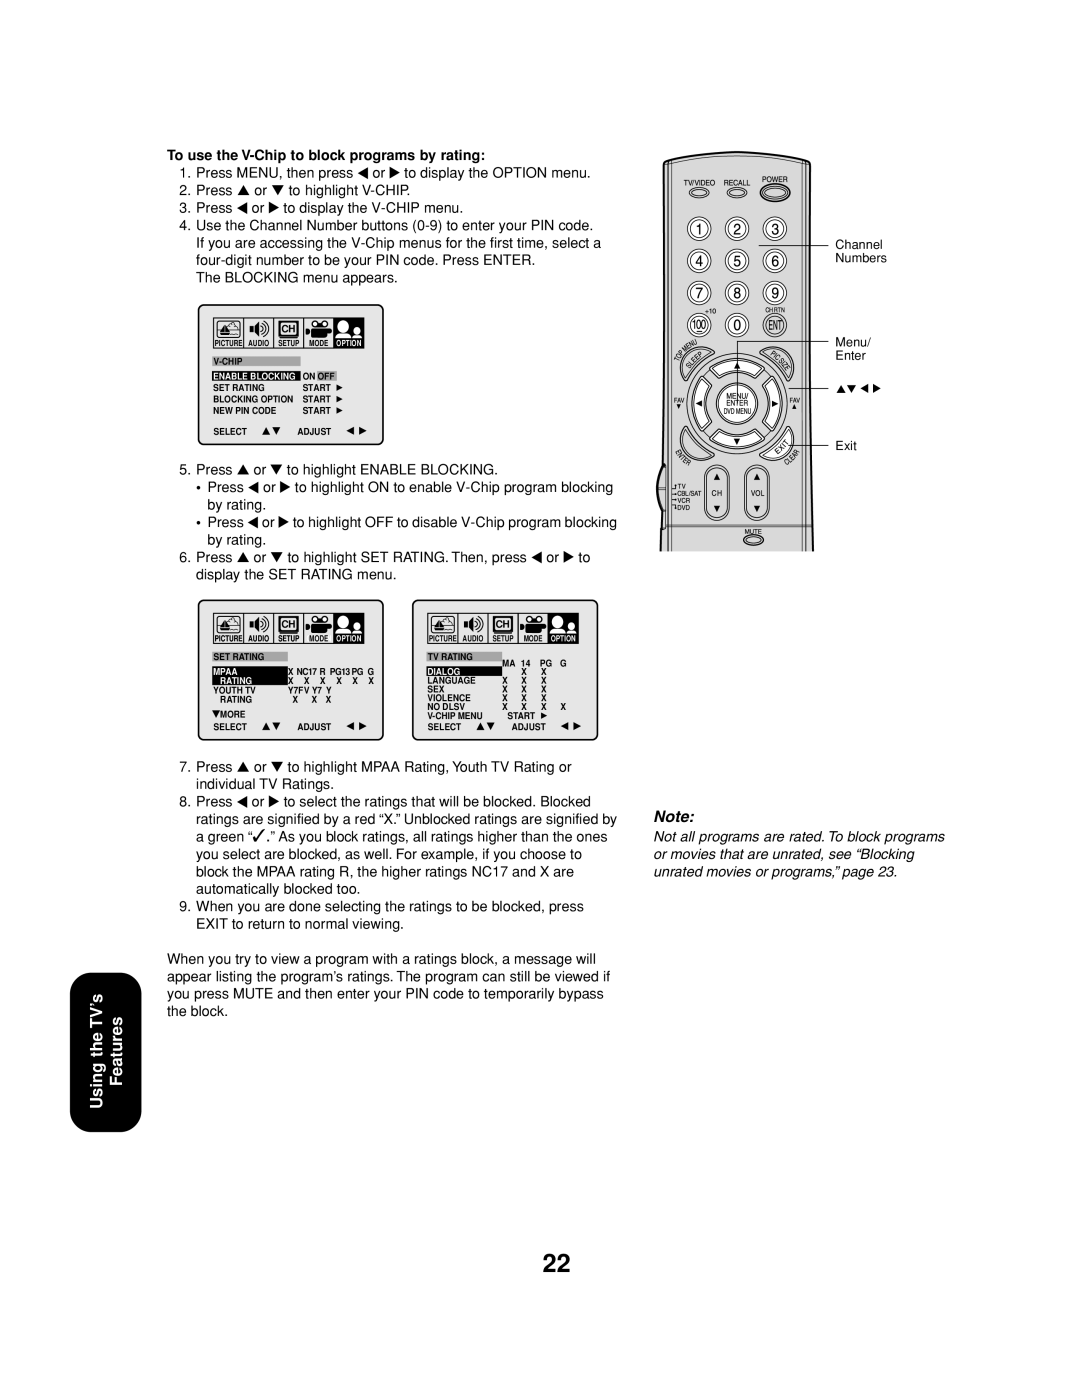 Toshiba 27AF53 appendix To use the V-Chip to block programs by rating, Four-digit number to be your PIN code. Press Enter 